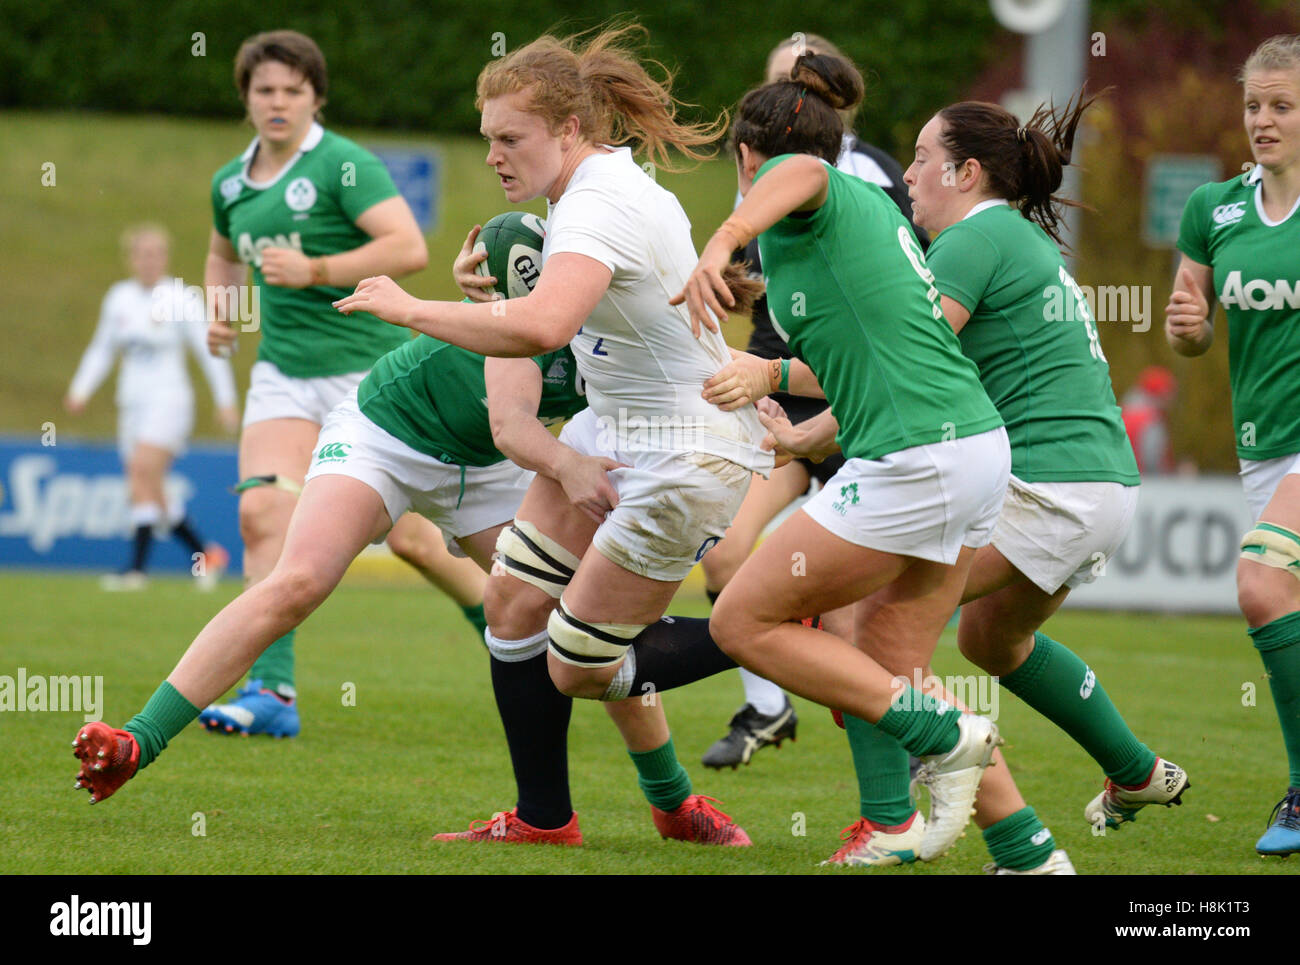 England's Harriet Miller-Hills is tackled during the Old Mutual Wealth Series match at University College Dublin. Stock Photo